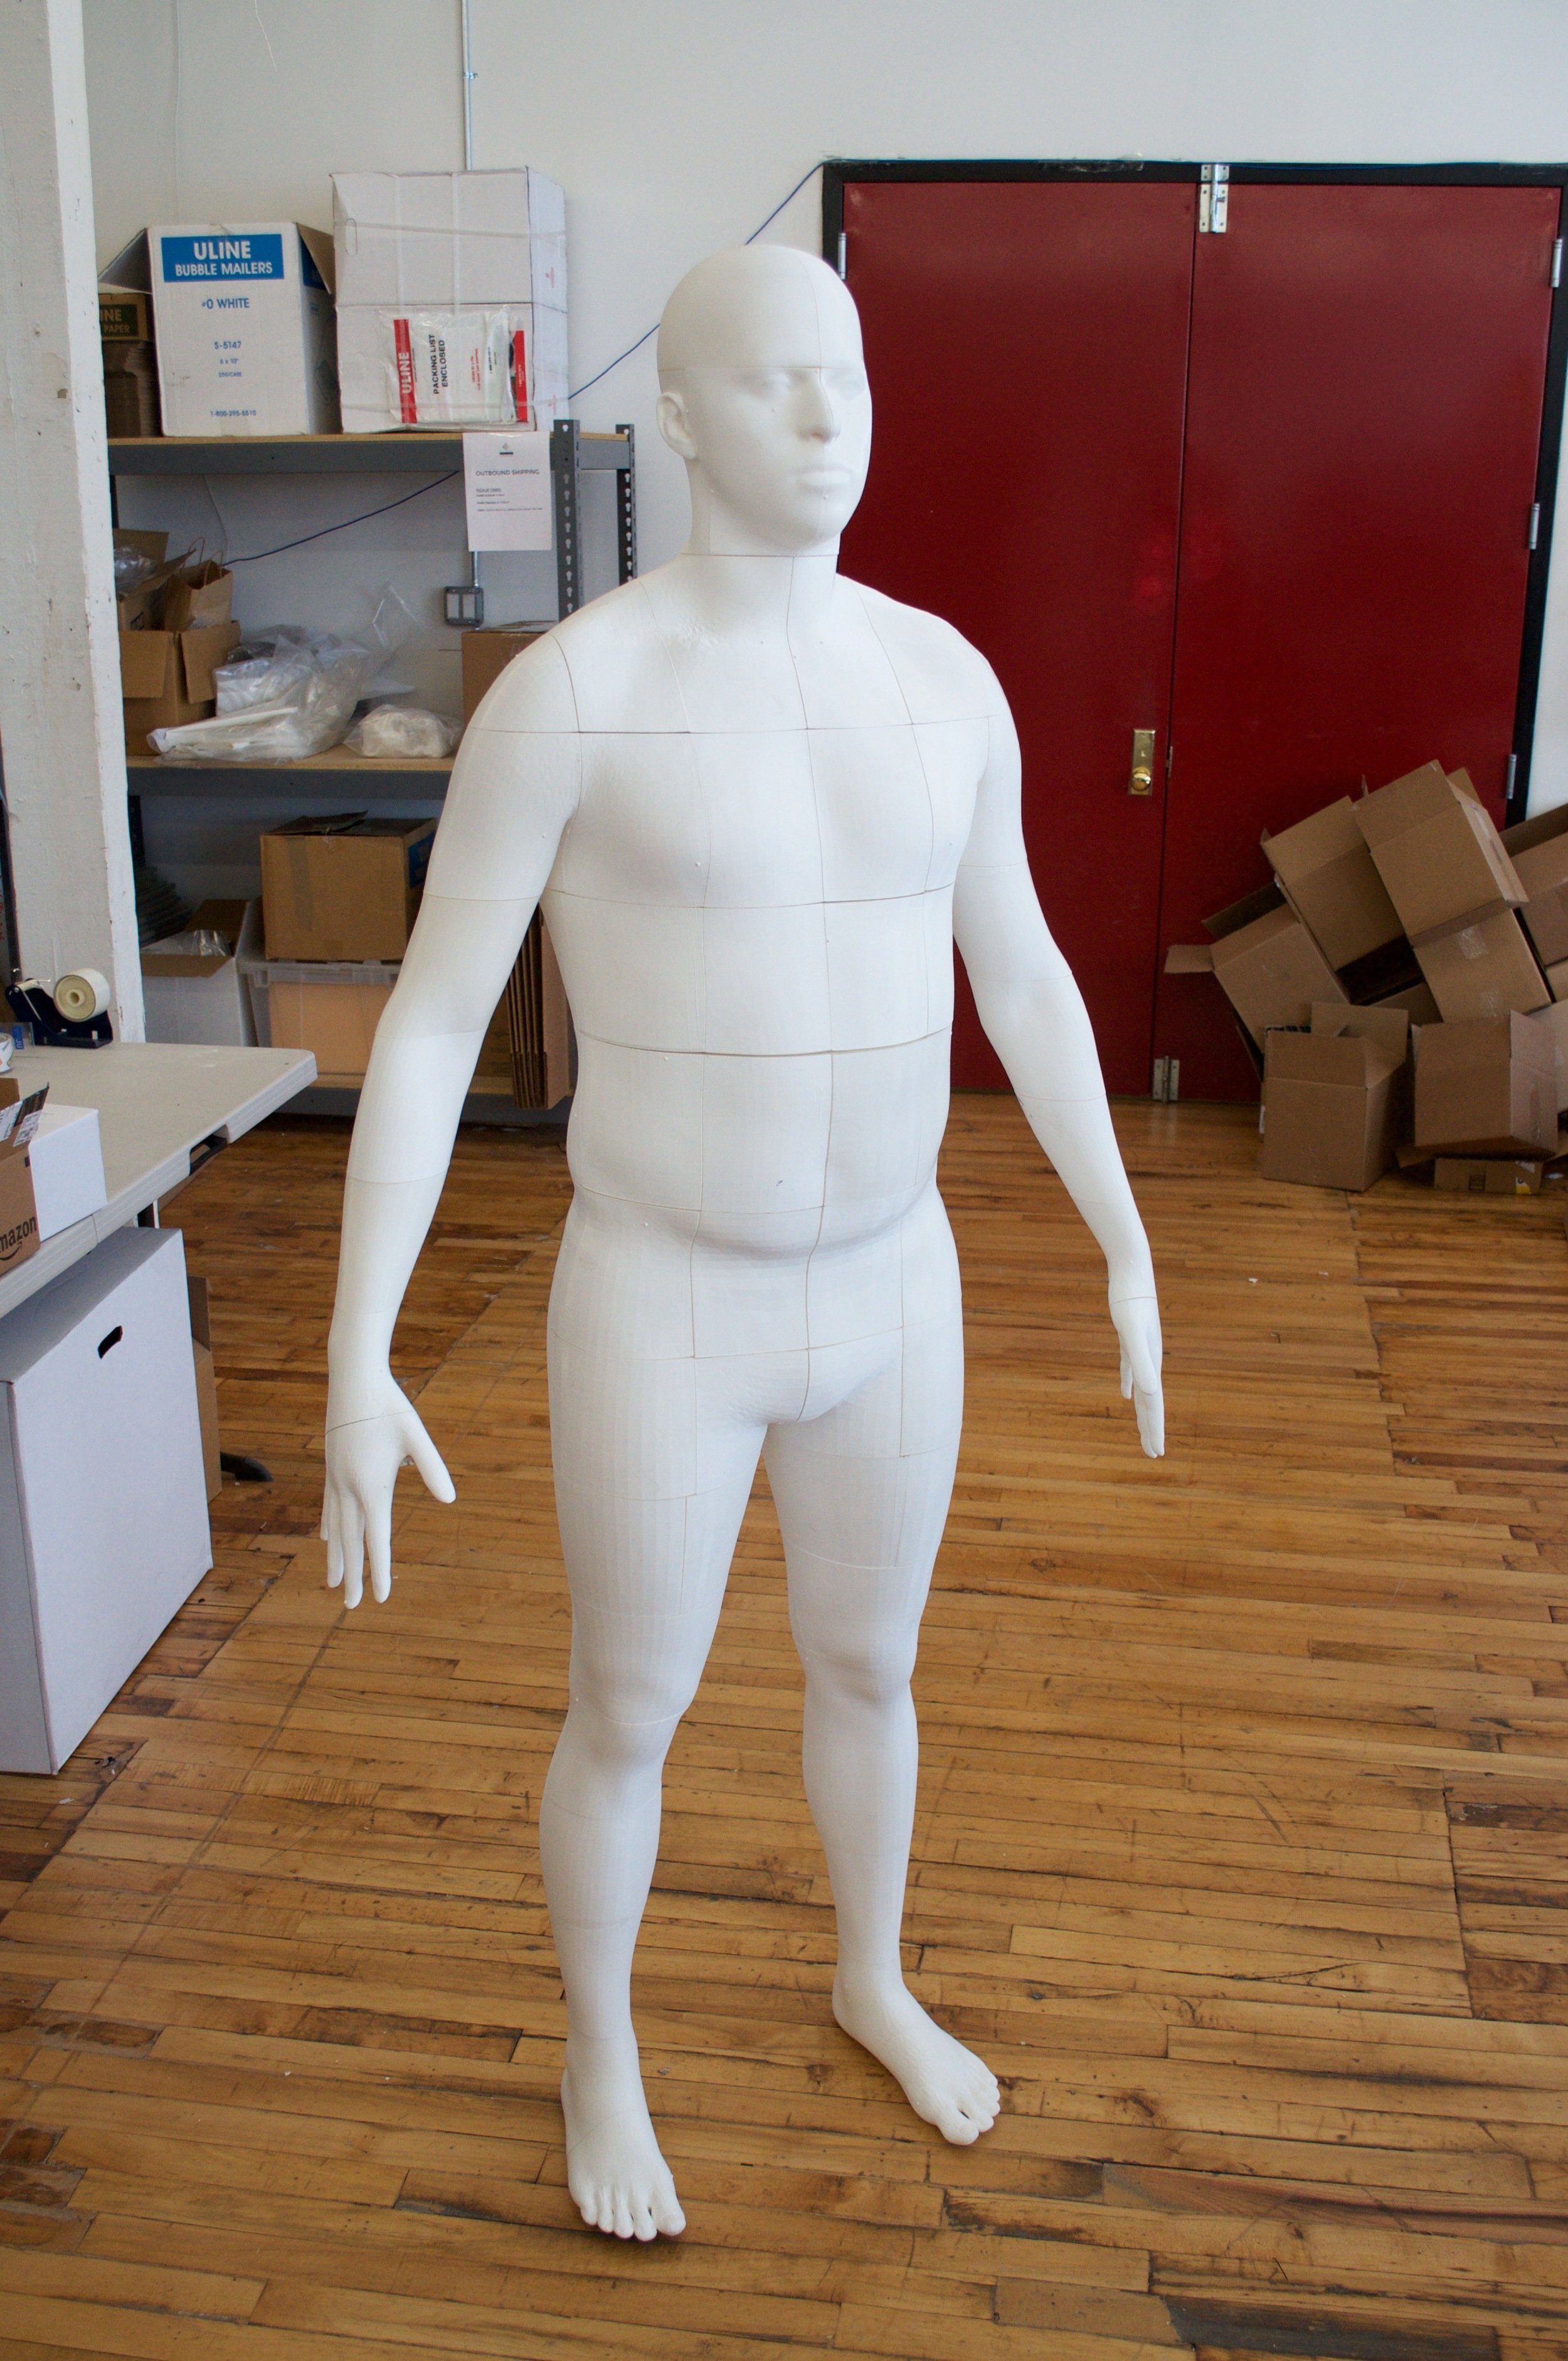  A fully assembled, life-size 3D print of a person 